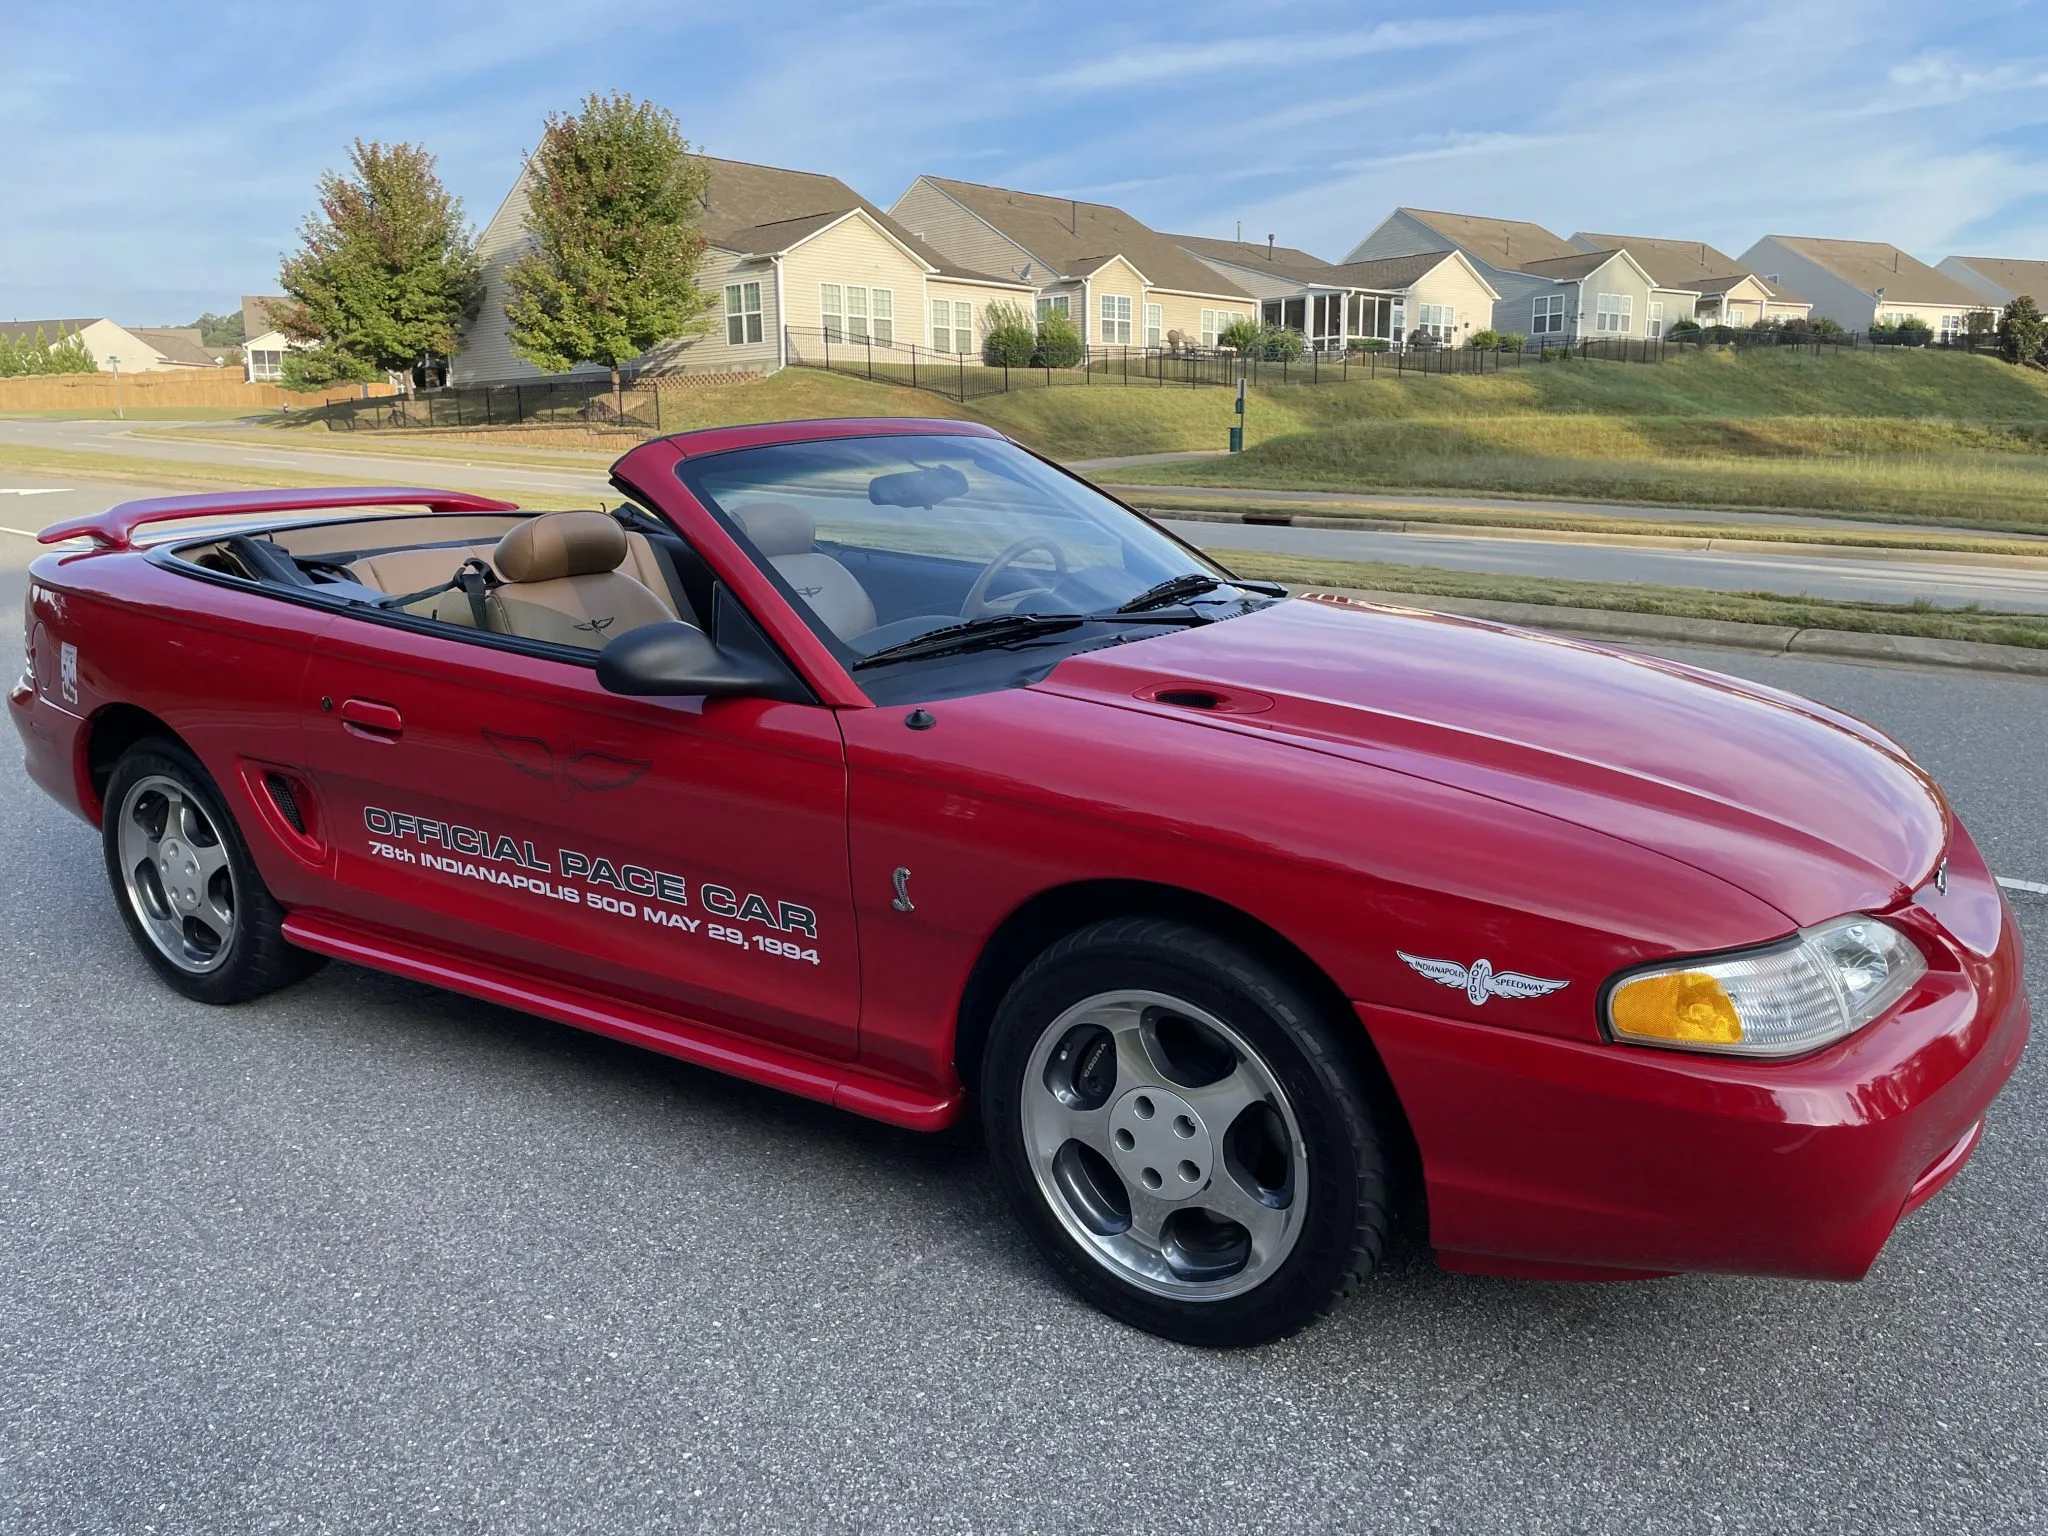 Mustang Of The Day: 1994 Mustang Cobra Convertible Indy 500 Pace Car